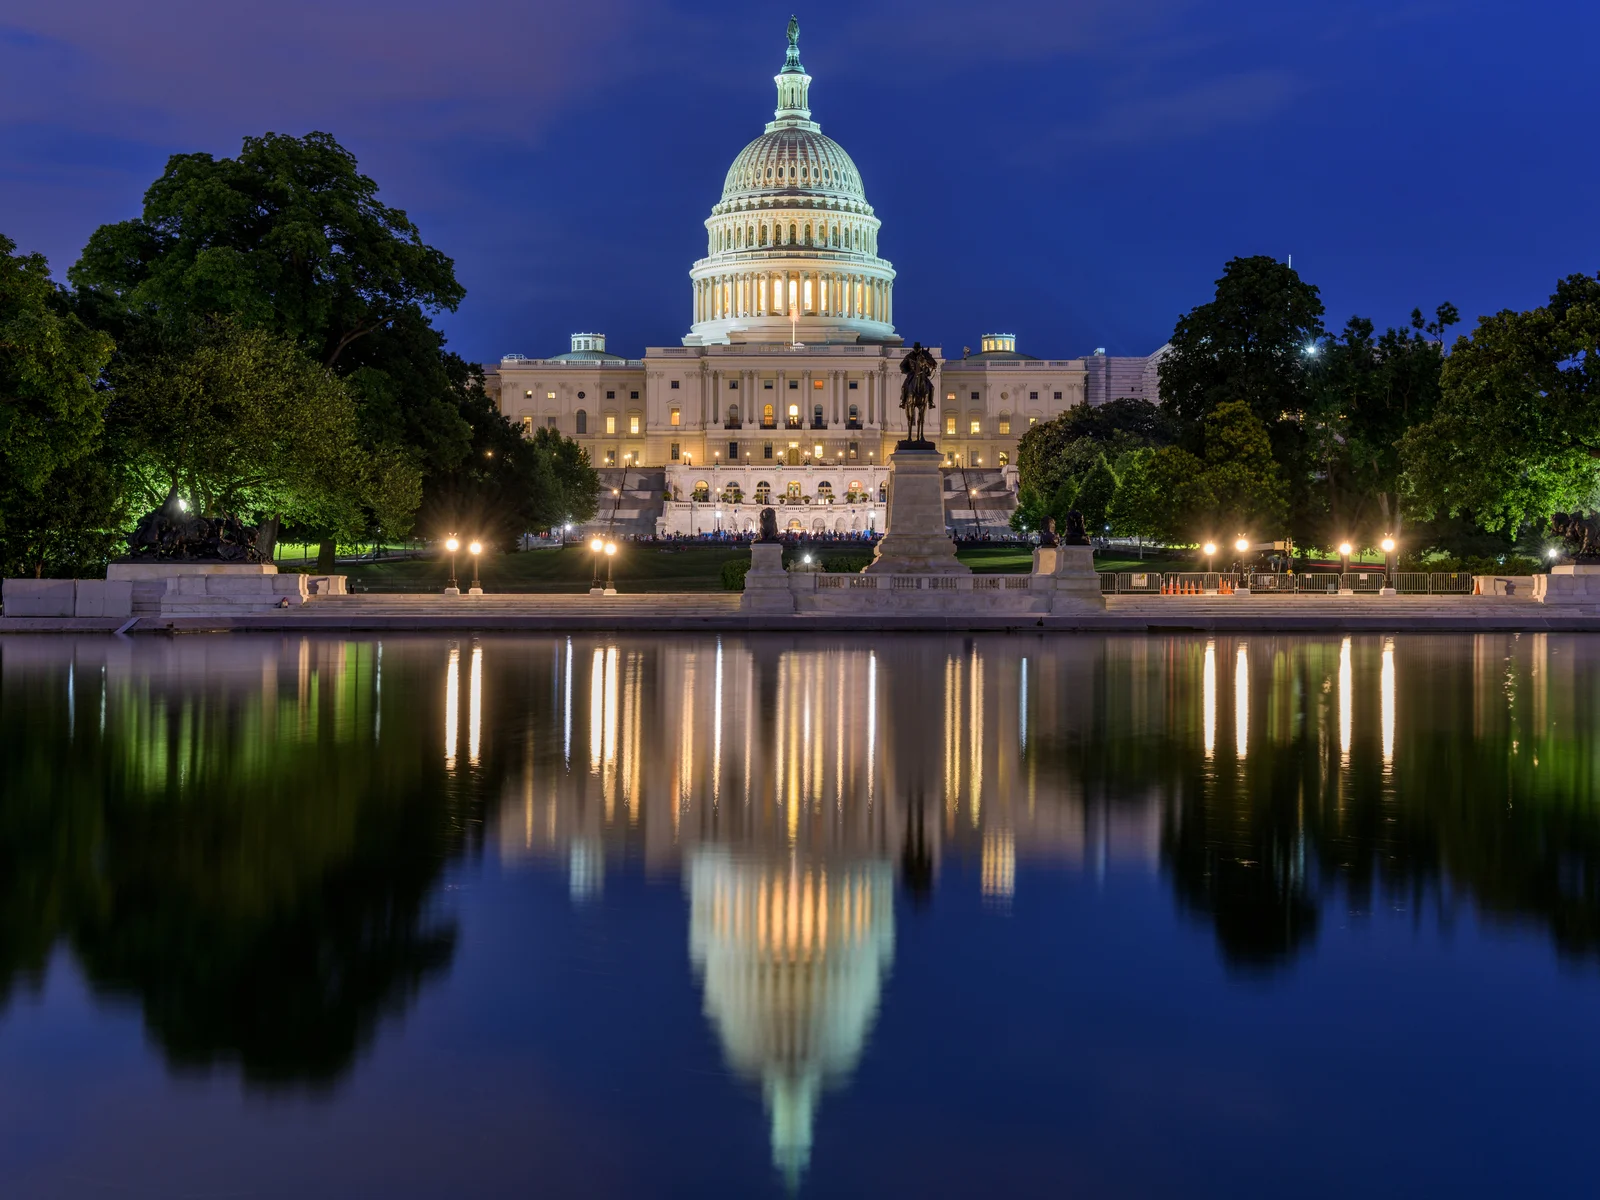 A crowd gathering during dusk at one of the best things to do in Washington, D.C., the U.S. Capitol Building which is reflected on the reflection pool